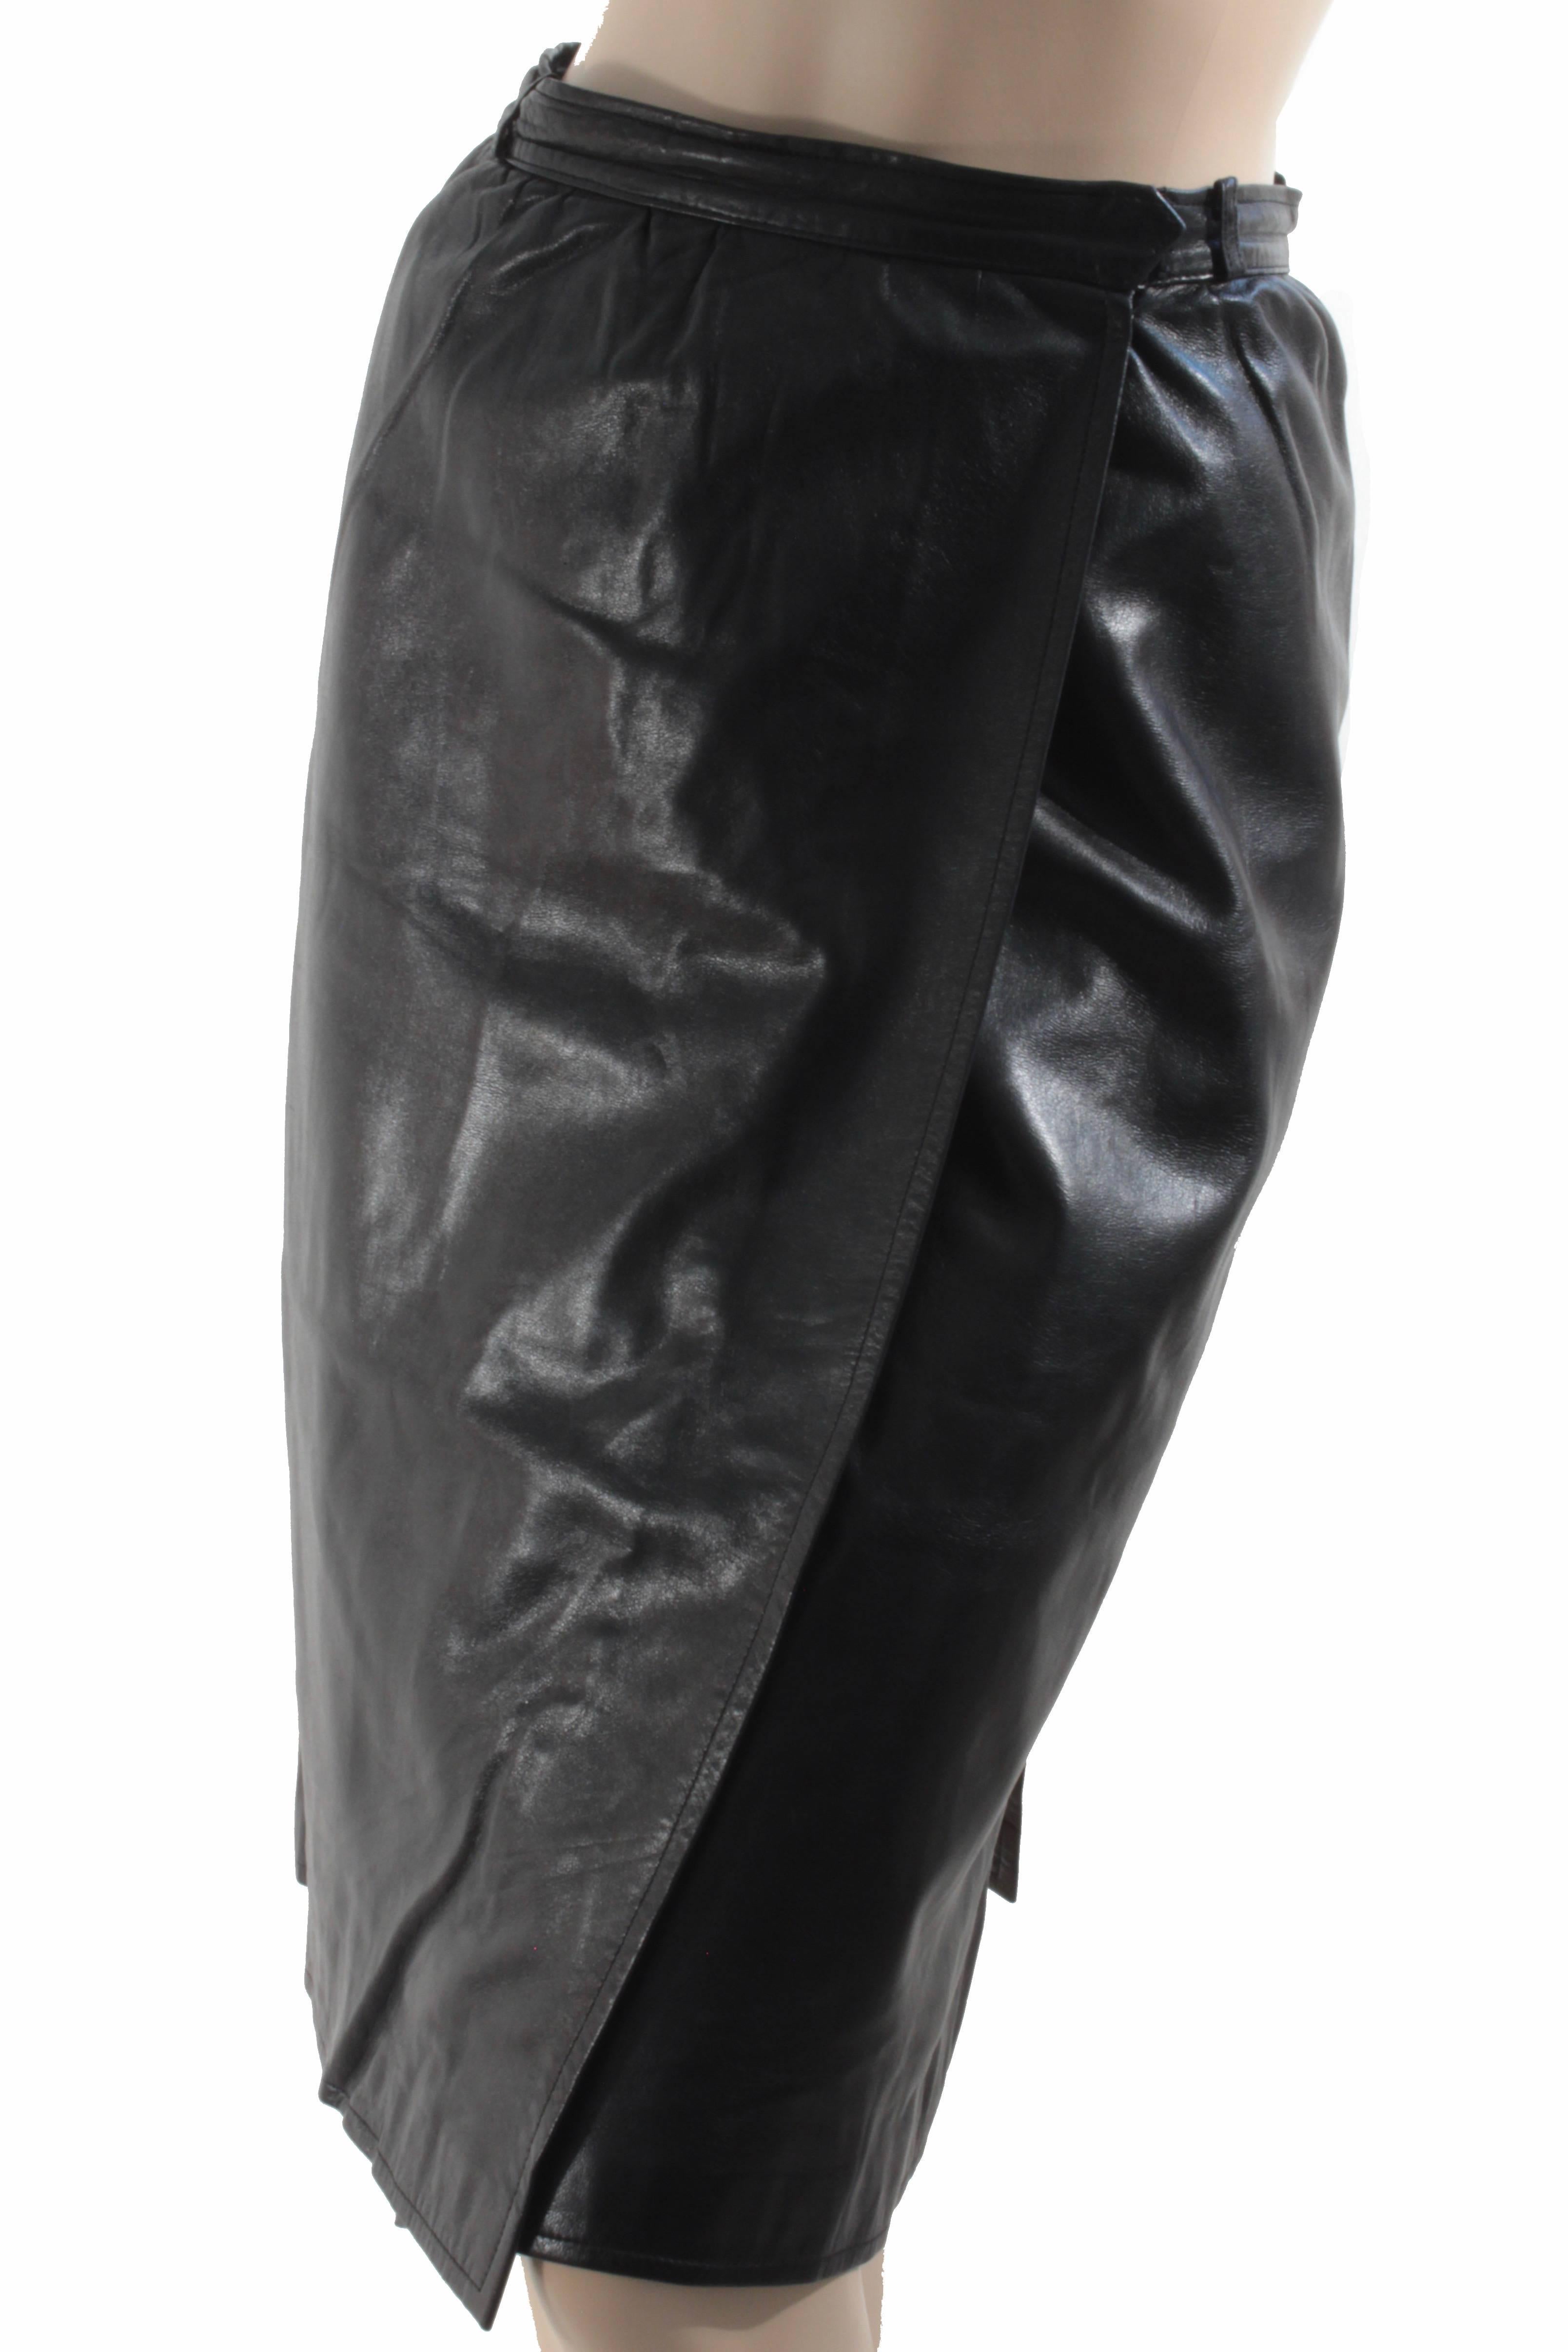 Here's an amazingly soft leather wrap skirt from Yves Saint Laurent Rive Gauche, most likely from the early 1990s.  Made from Metis leather - a supple and thin lambskin hide - it fastens with two flat hook/eye closures and one small closure. 